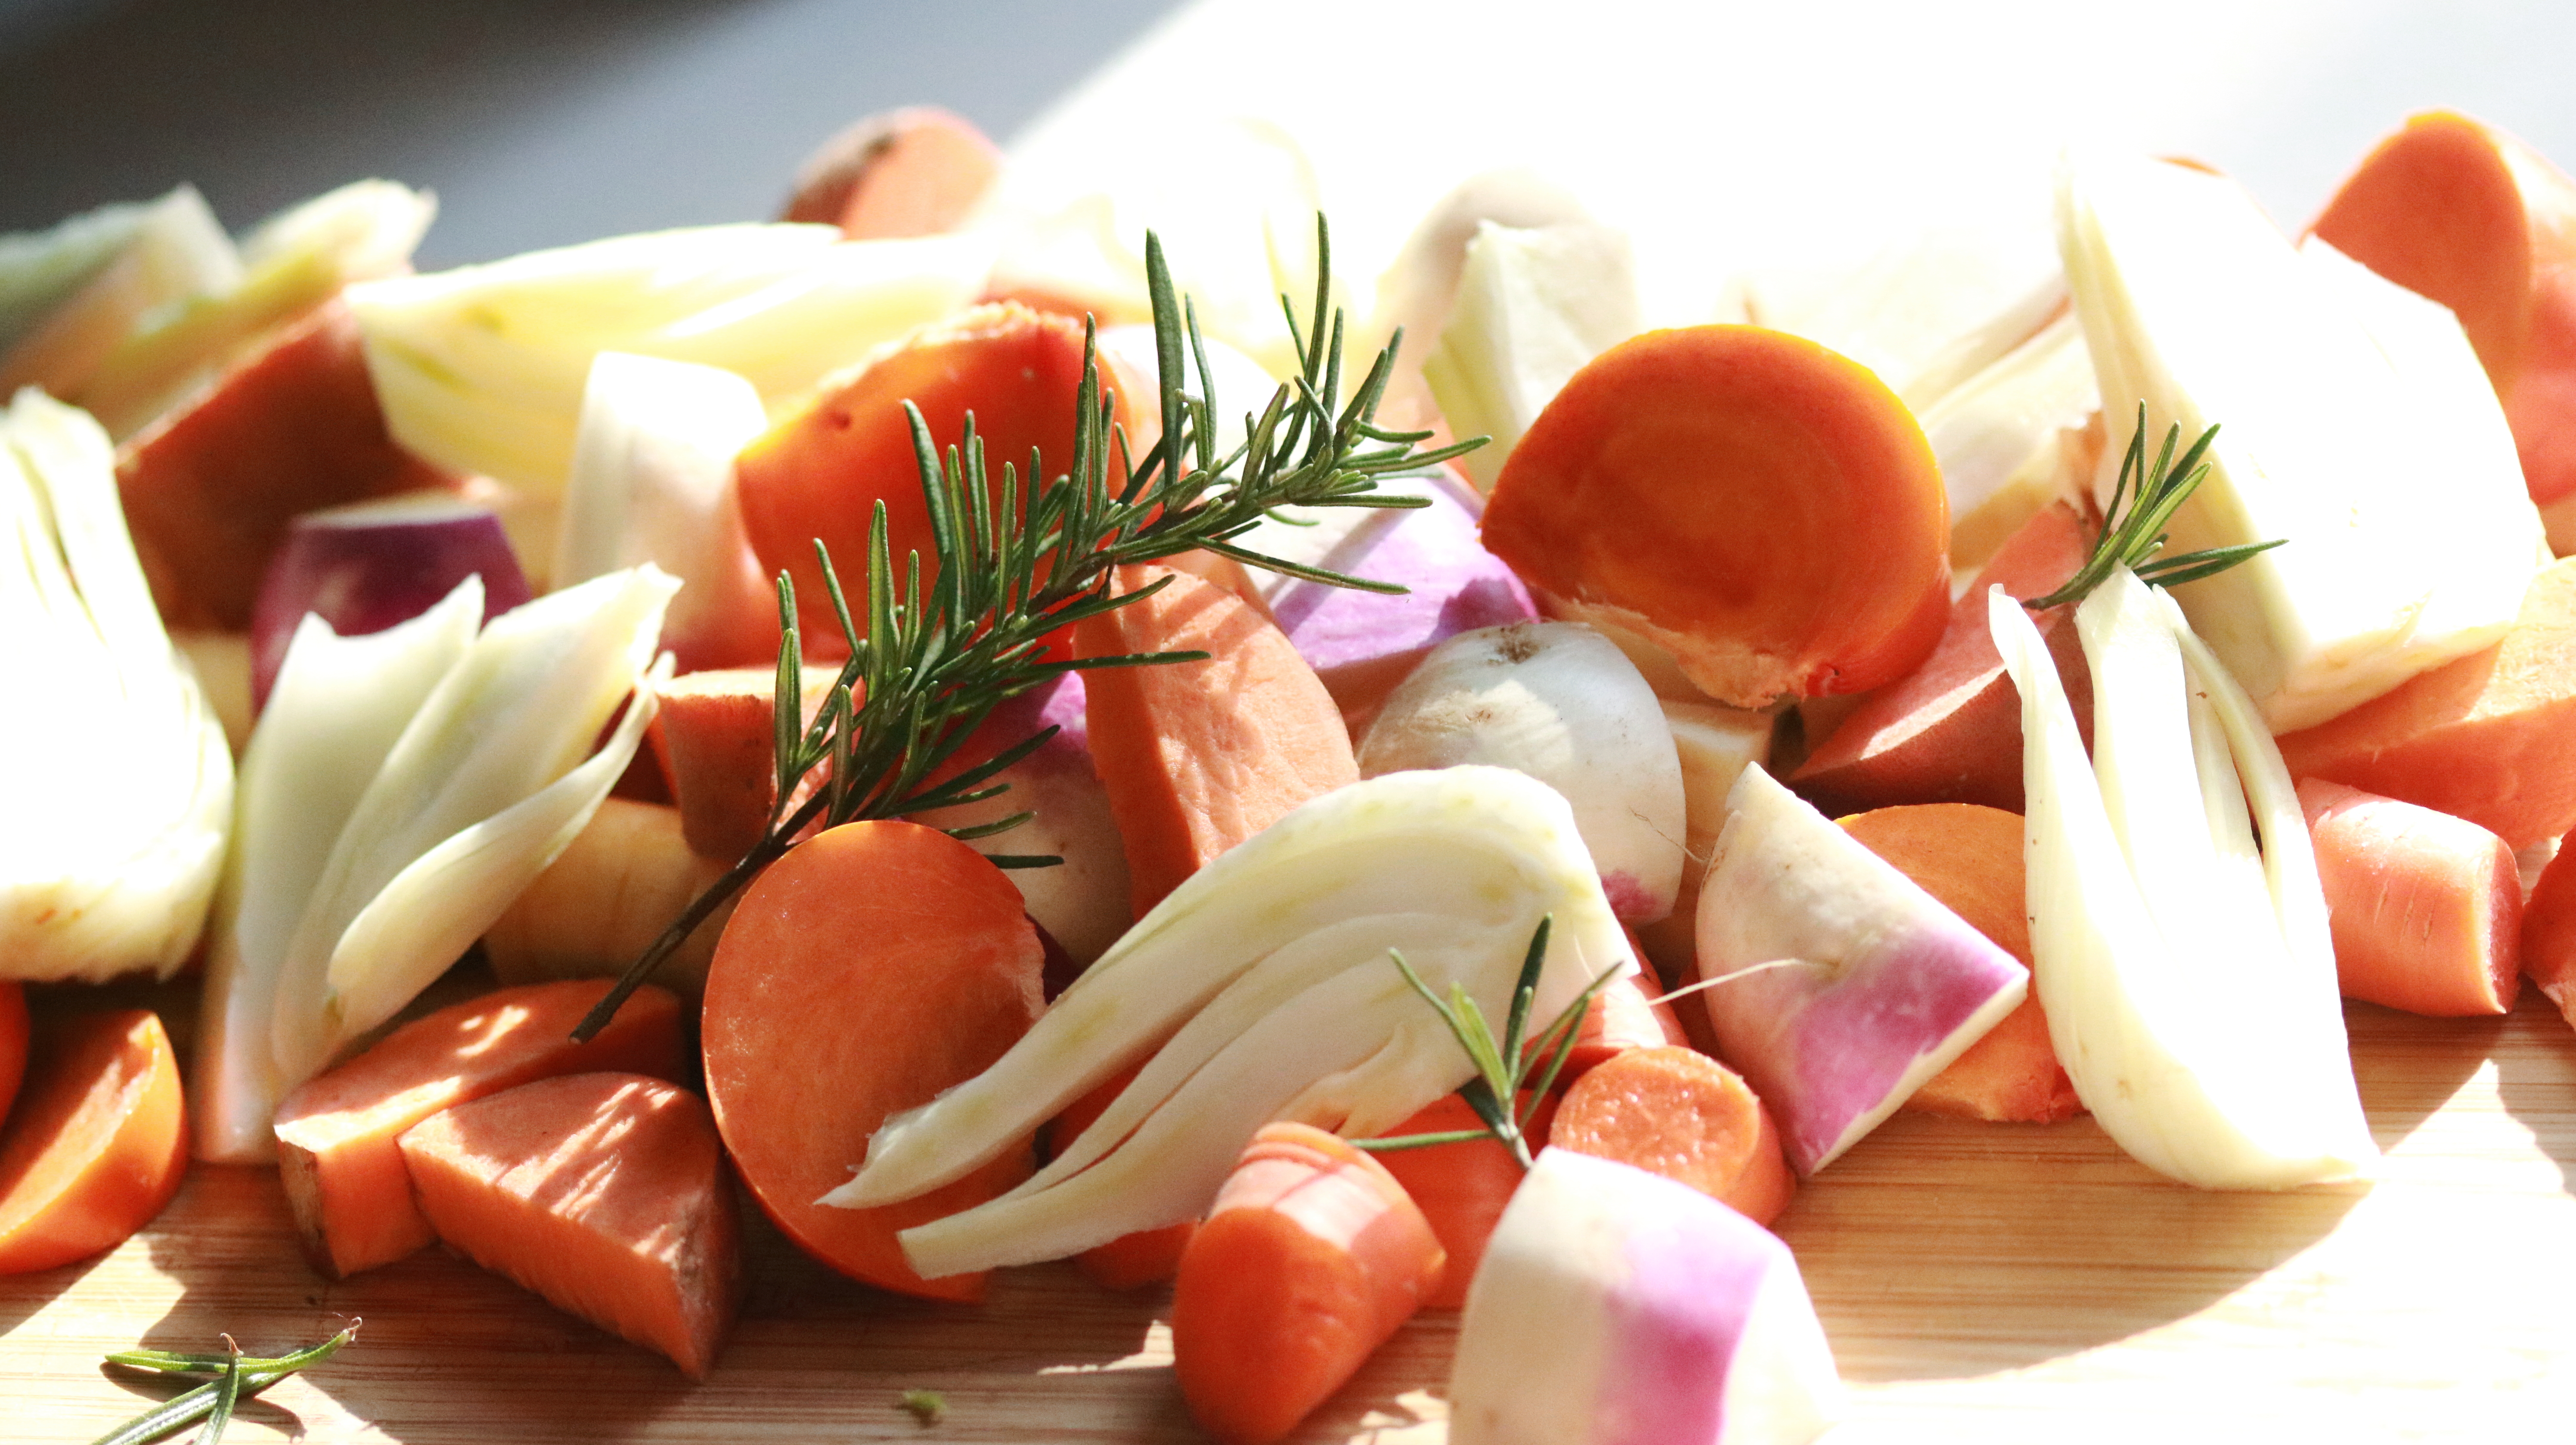 Roasted root vegetables with fennel and persimmons2